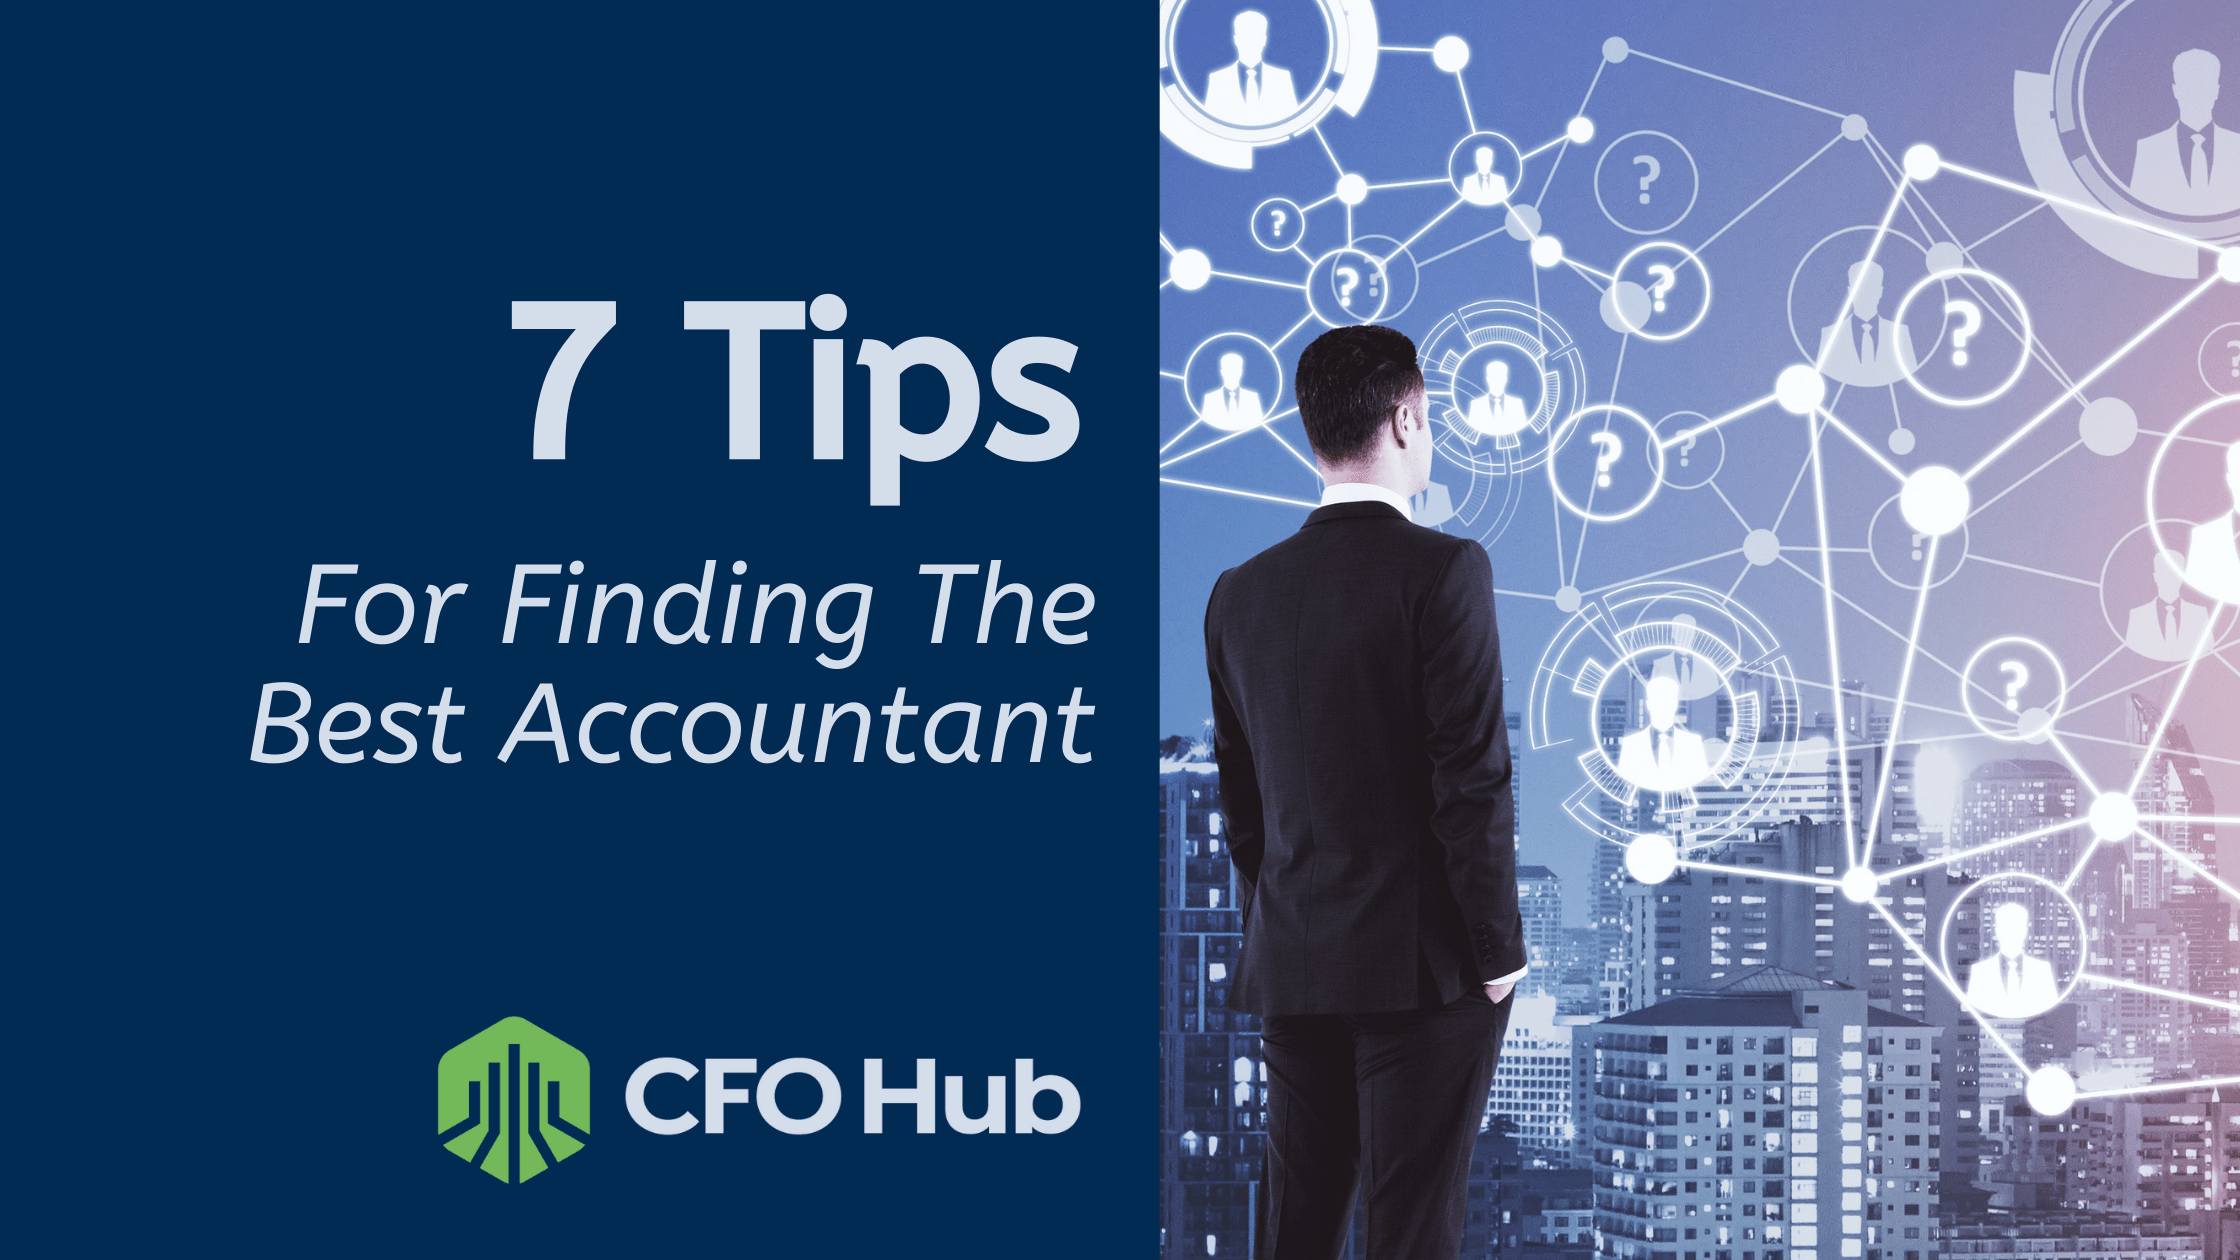 7 Tips for finding the best accountant